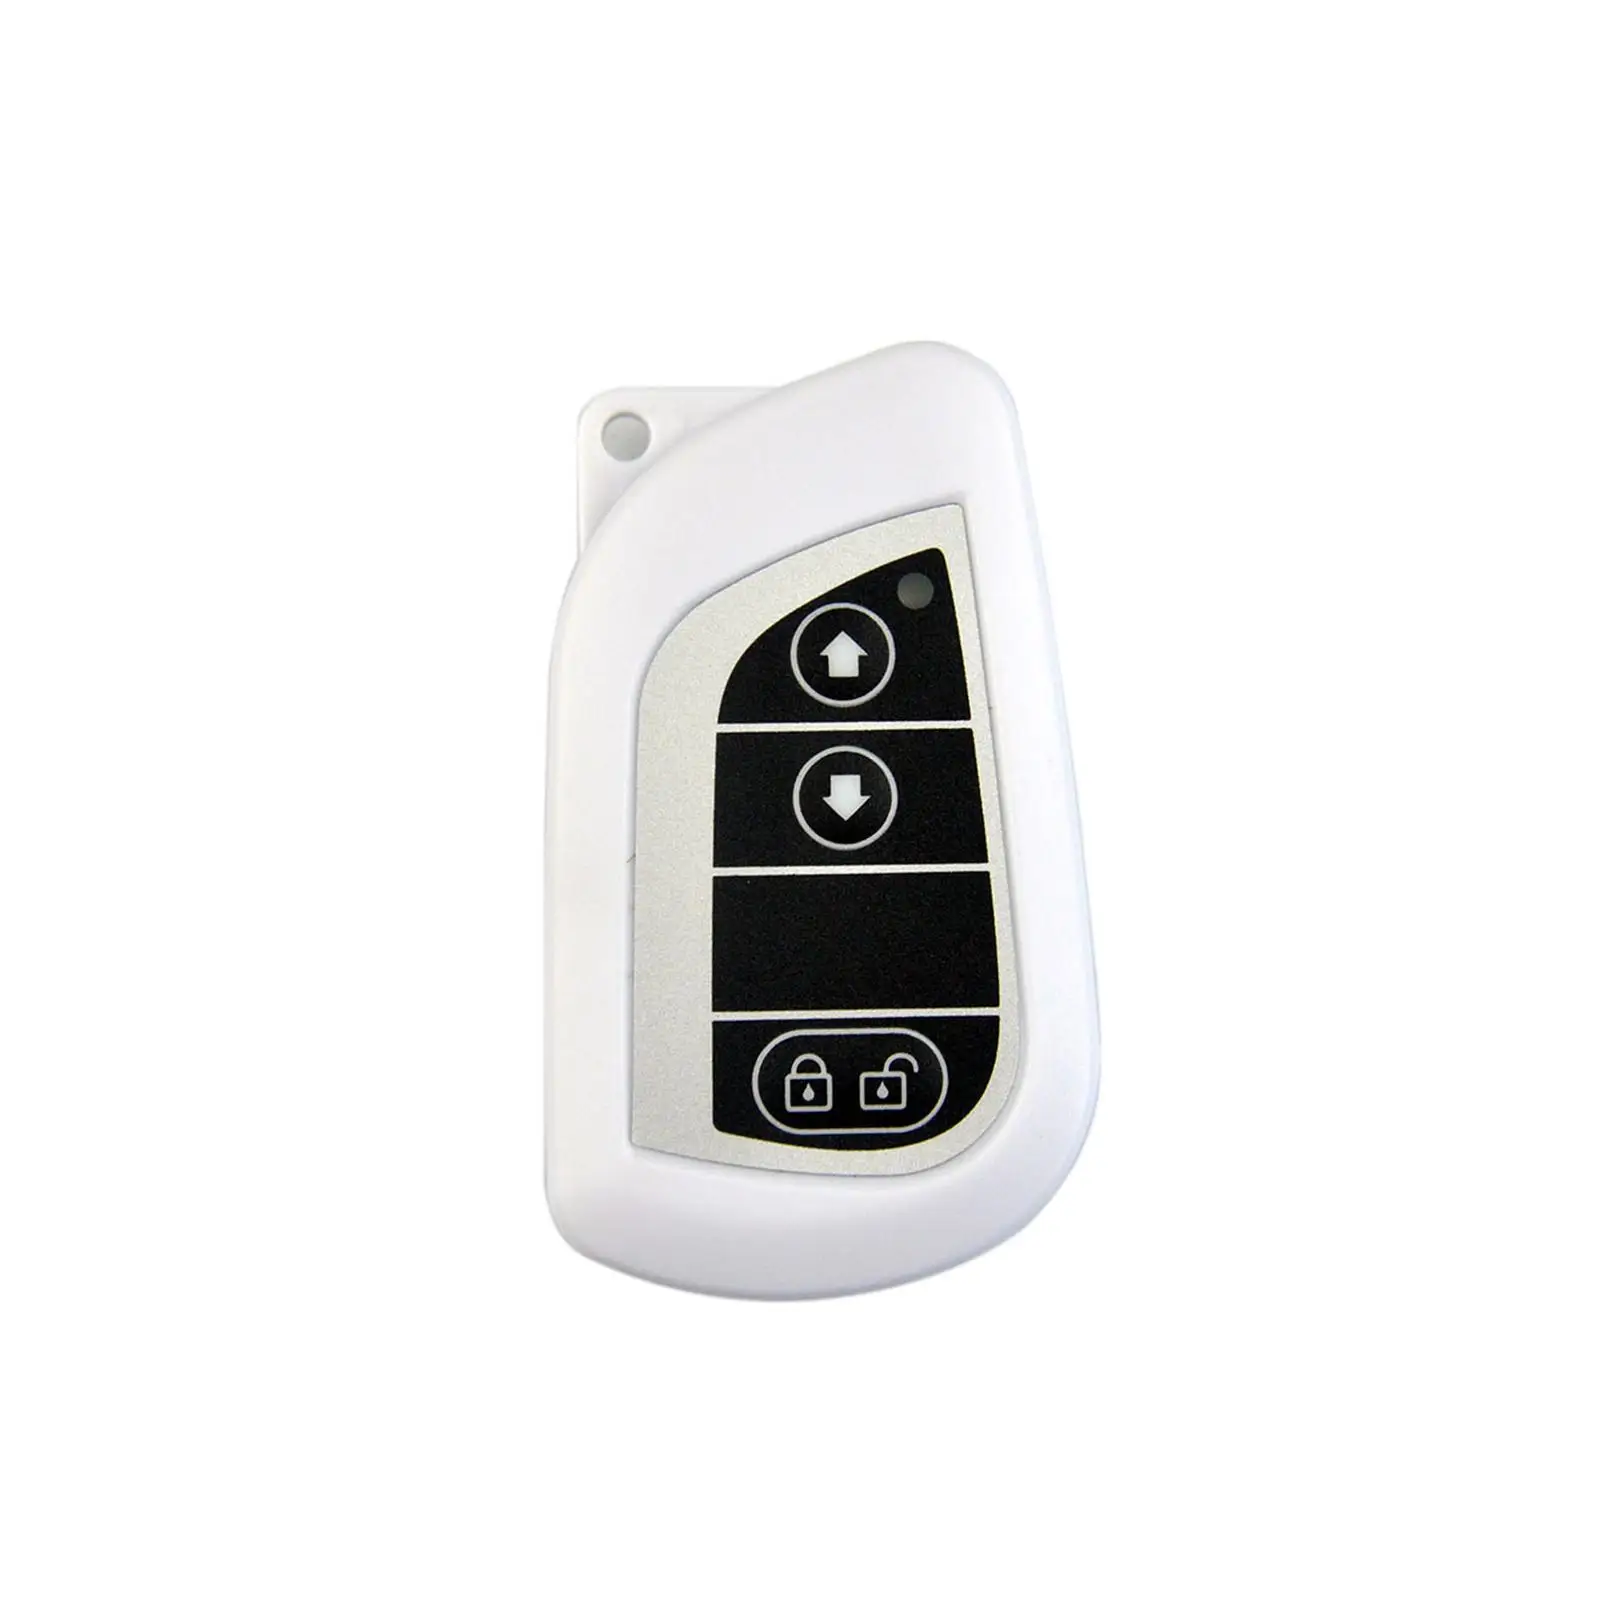 Electric Vehicle Bluetooth Remote Control Small Replacement Fitments Sturdy for 3~8 Year Old Kids Powered Ride on Cars Remote